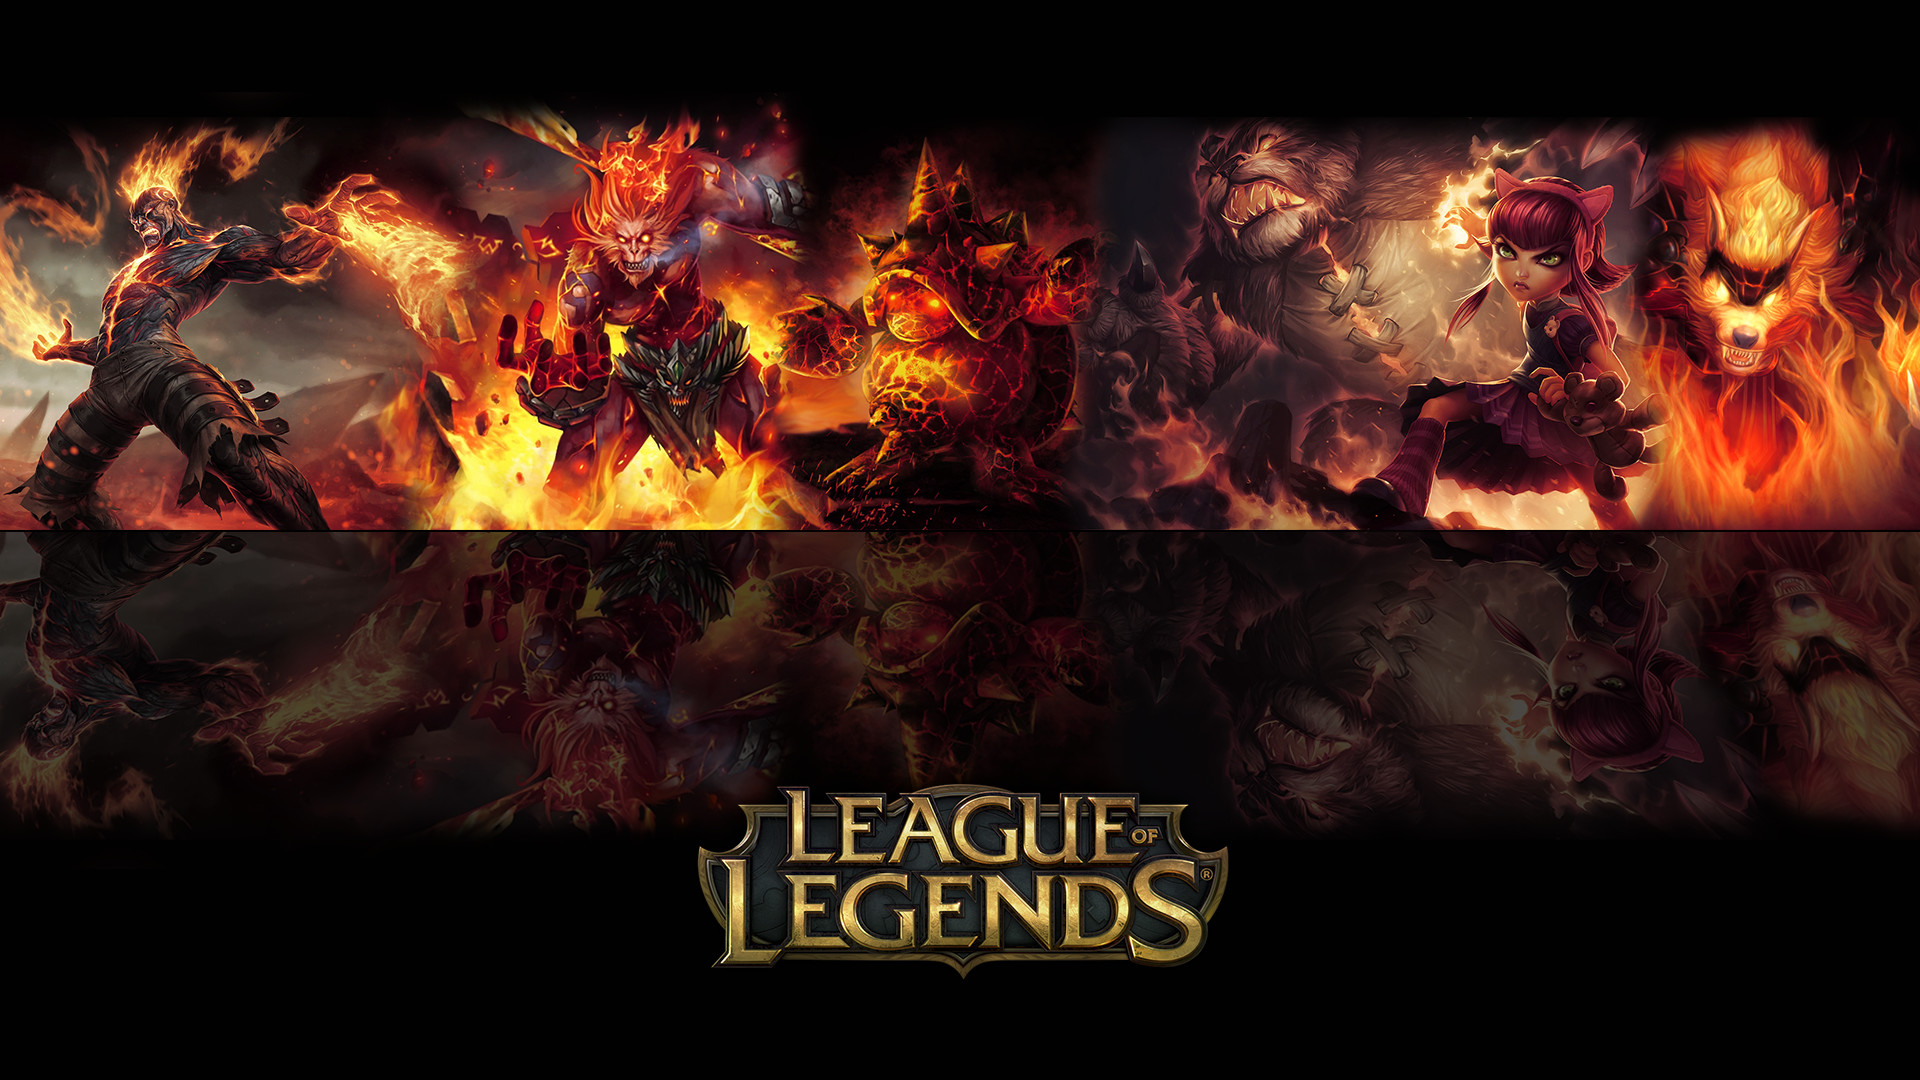 1920x1080 ... League of legends Fire Wallpaper by ViciousBlue